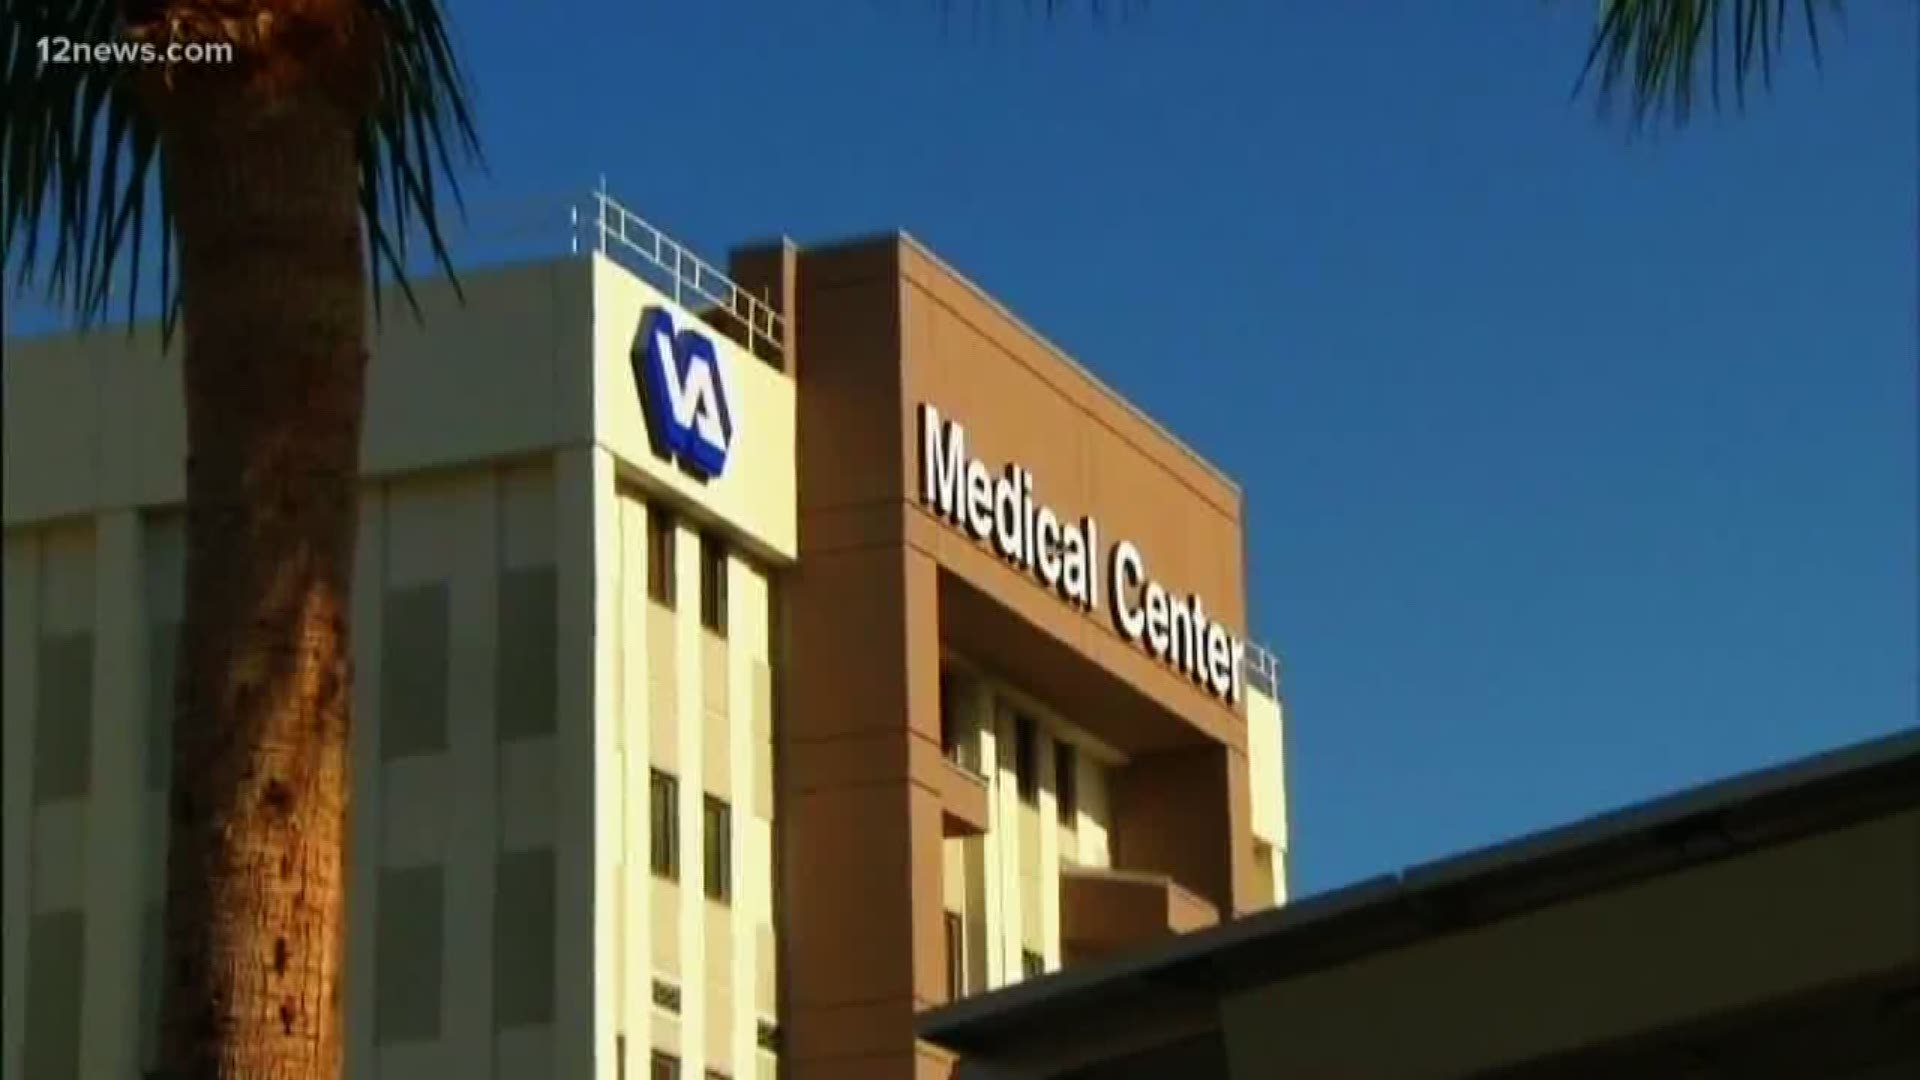 A group of female veterans is planning to protest after the Phoenix VA cut their sexual assault survivor support group.